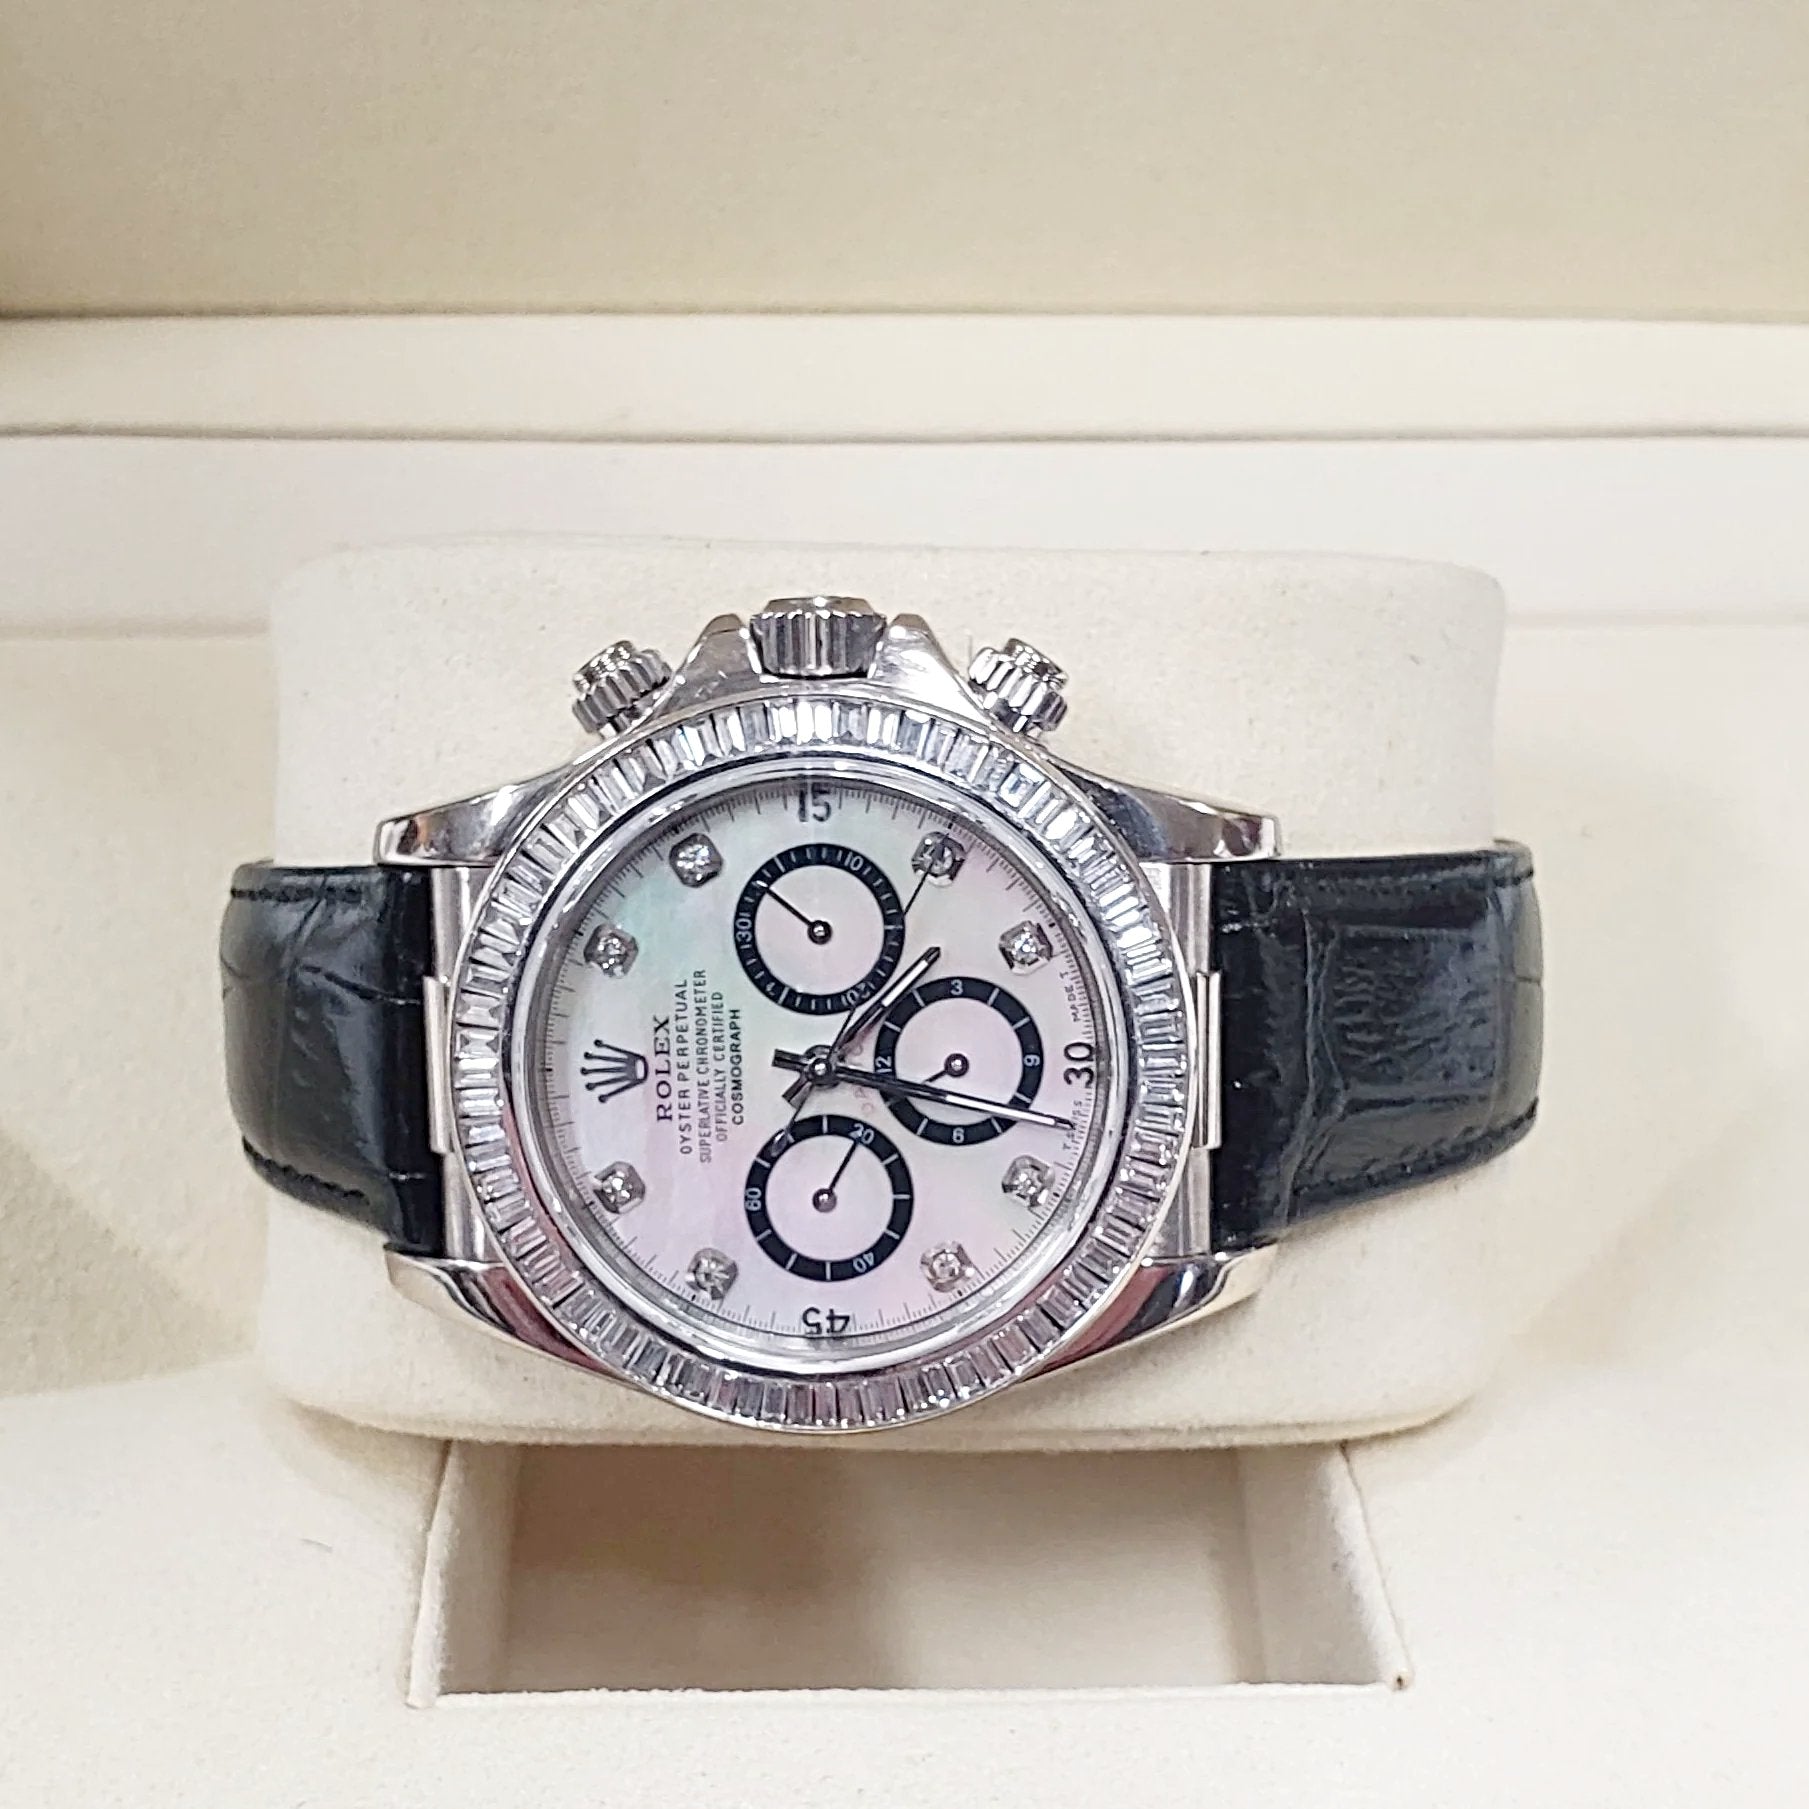 Men's Rolex Daytona  40mm Leather Band Watch with Mother of Pearl Diamond Dial and Diamond Bezel. (Pre-Owned 116518)